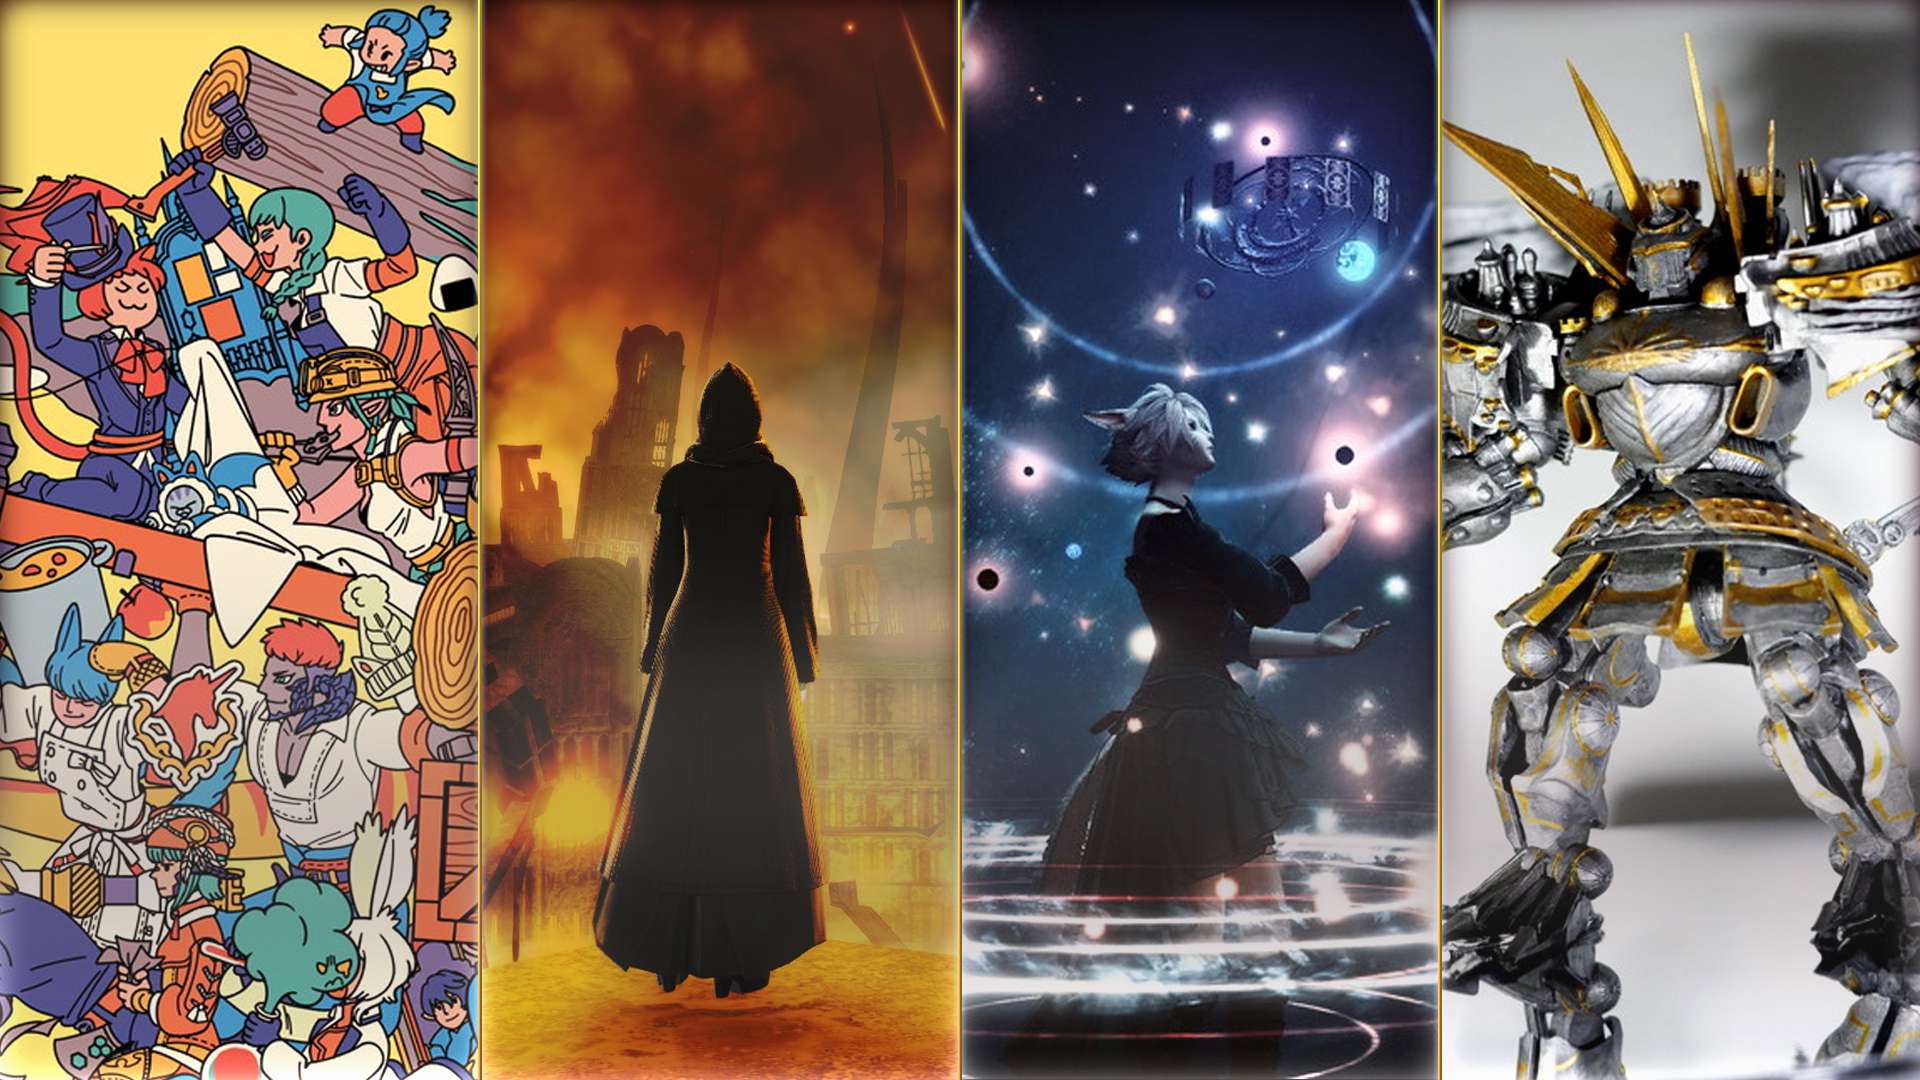 4 Final Fantasy 14 artworks, including a digital illustration of player characters two screenshots of a hooded figure and a Miqo'te wielding a planisphere, and a model of Perfect Alexander.